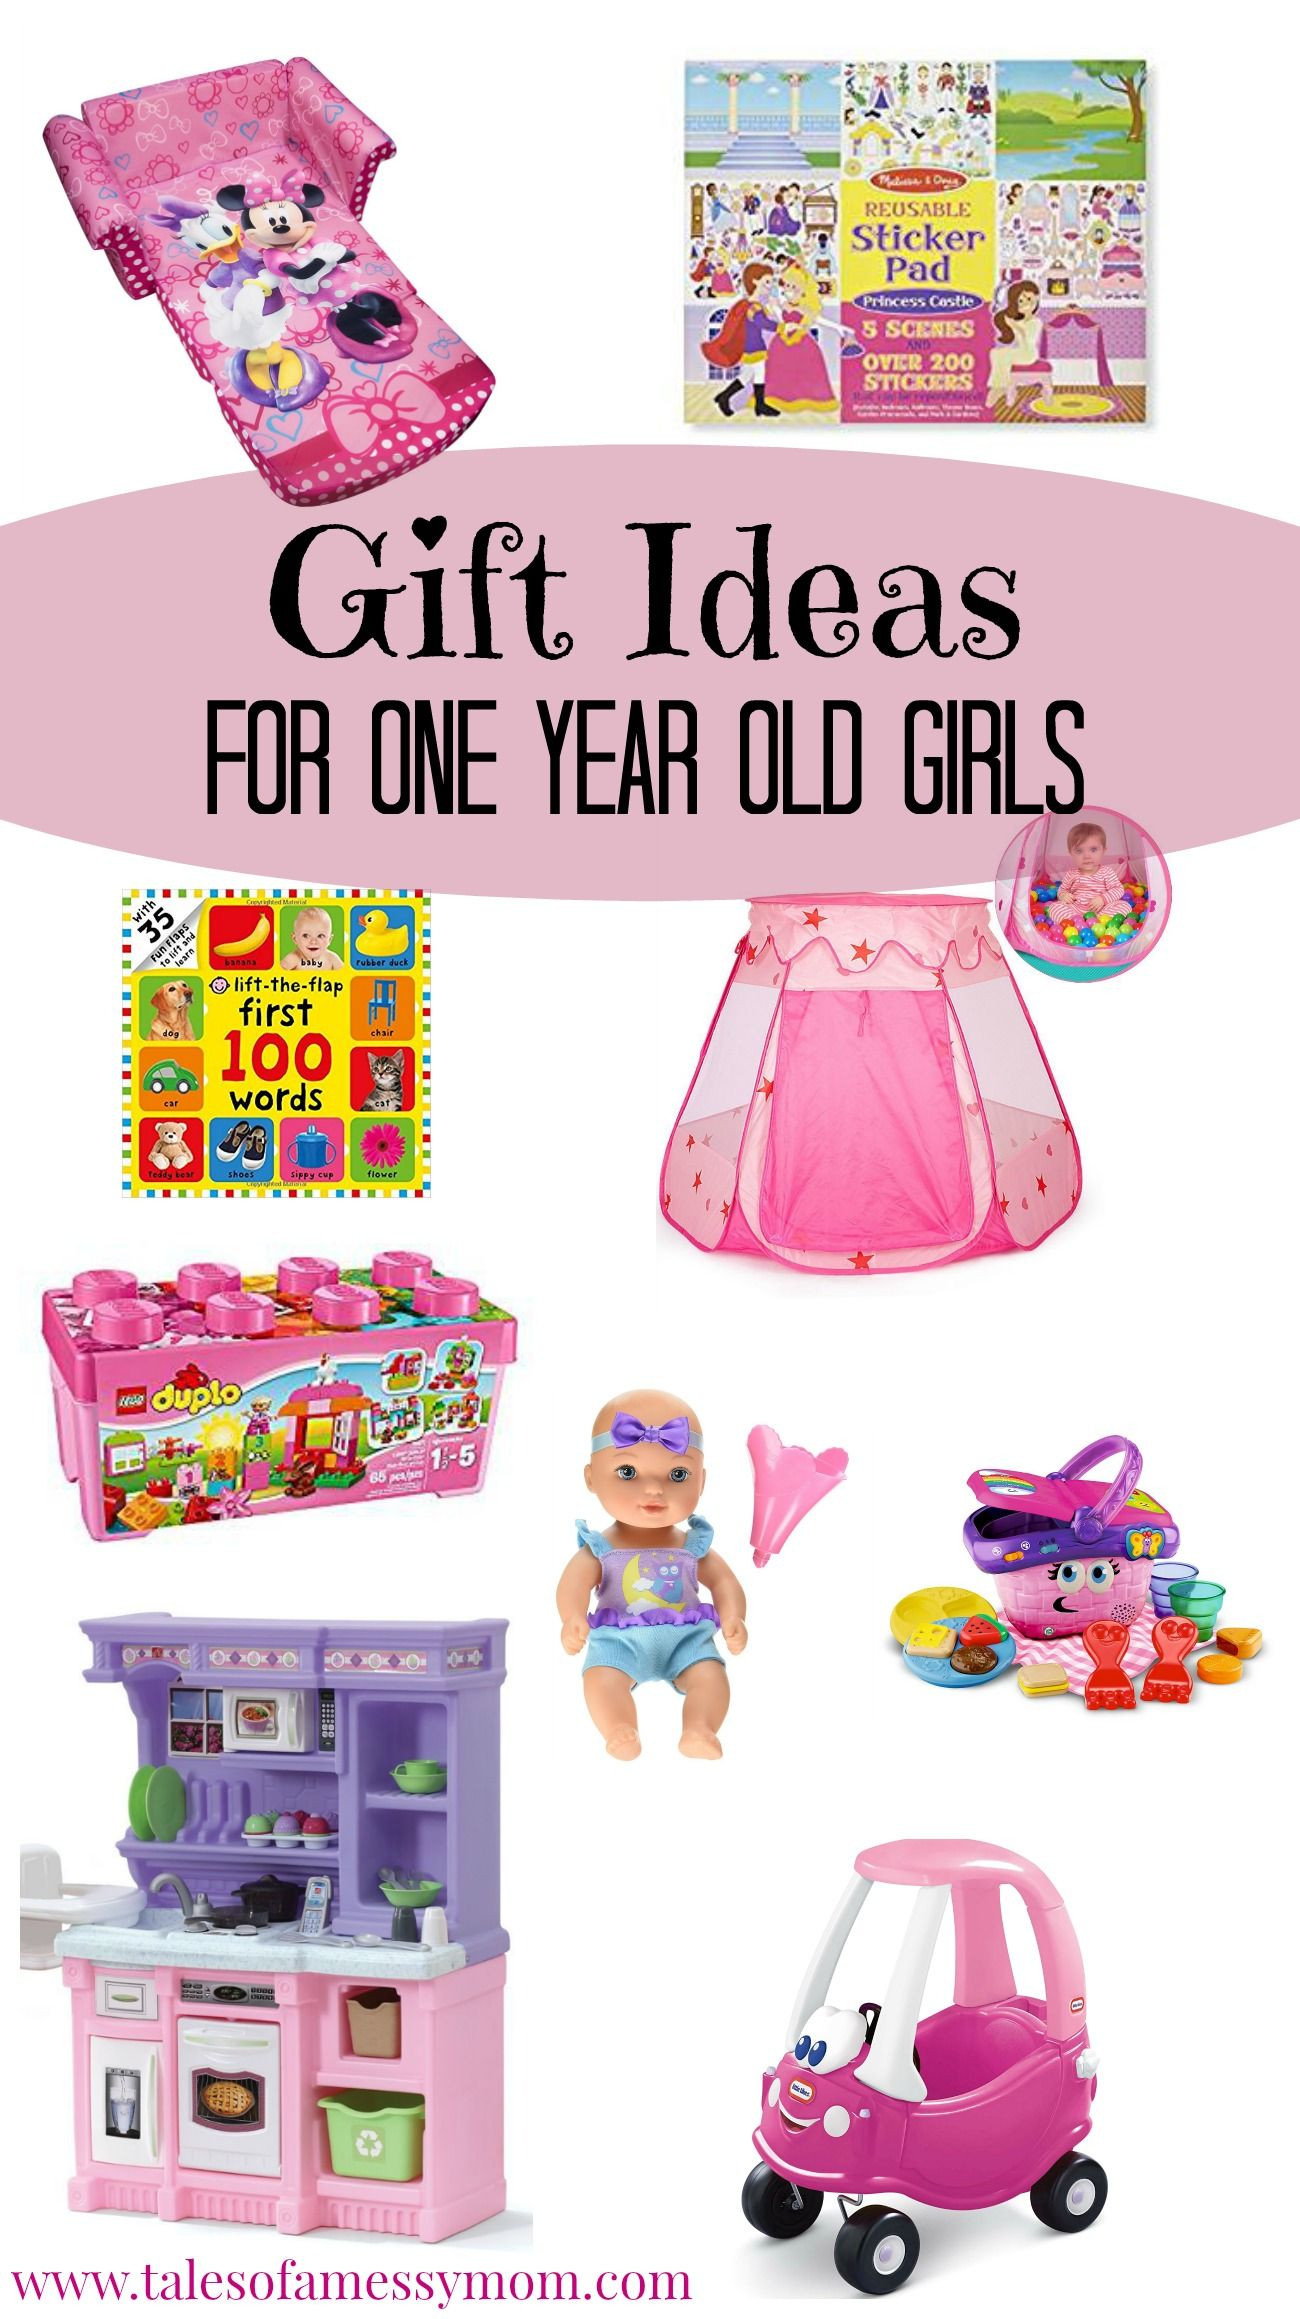 Birthday Gift Ideas For Baby Girl
 Gift Ideas for e Year Old Girls